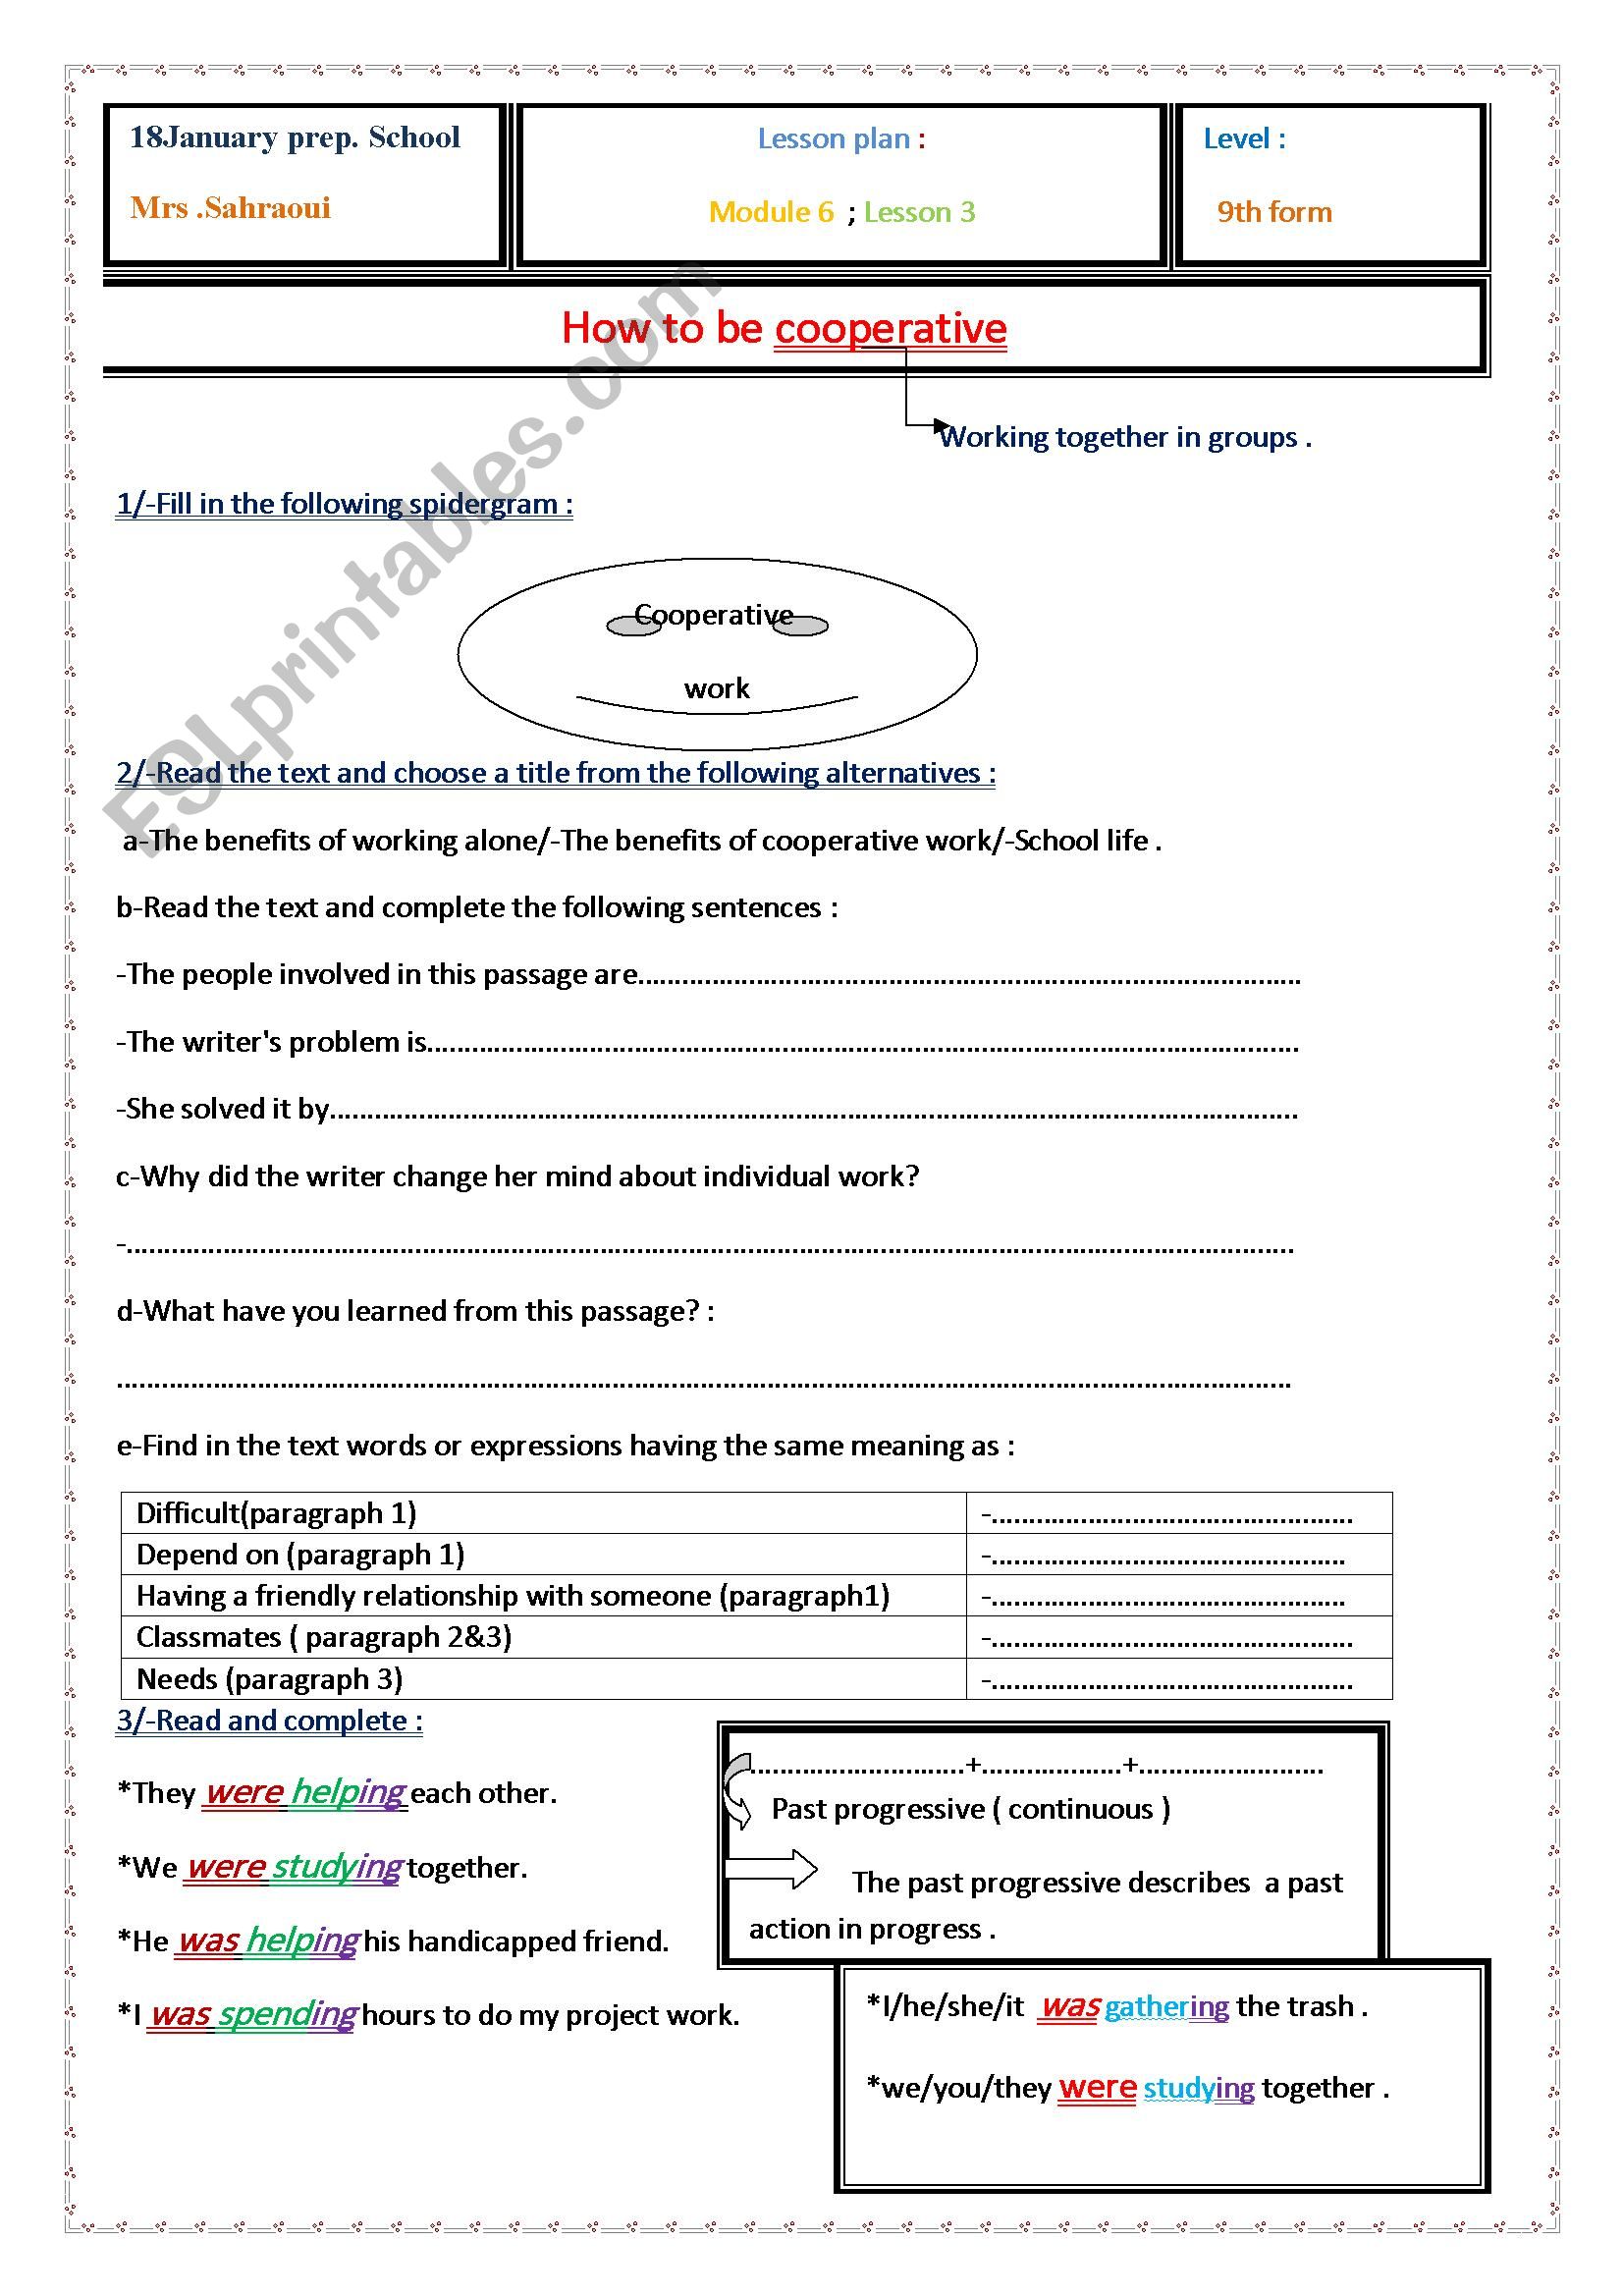 How to be cooperative worksheet